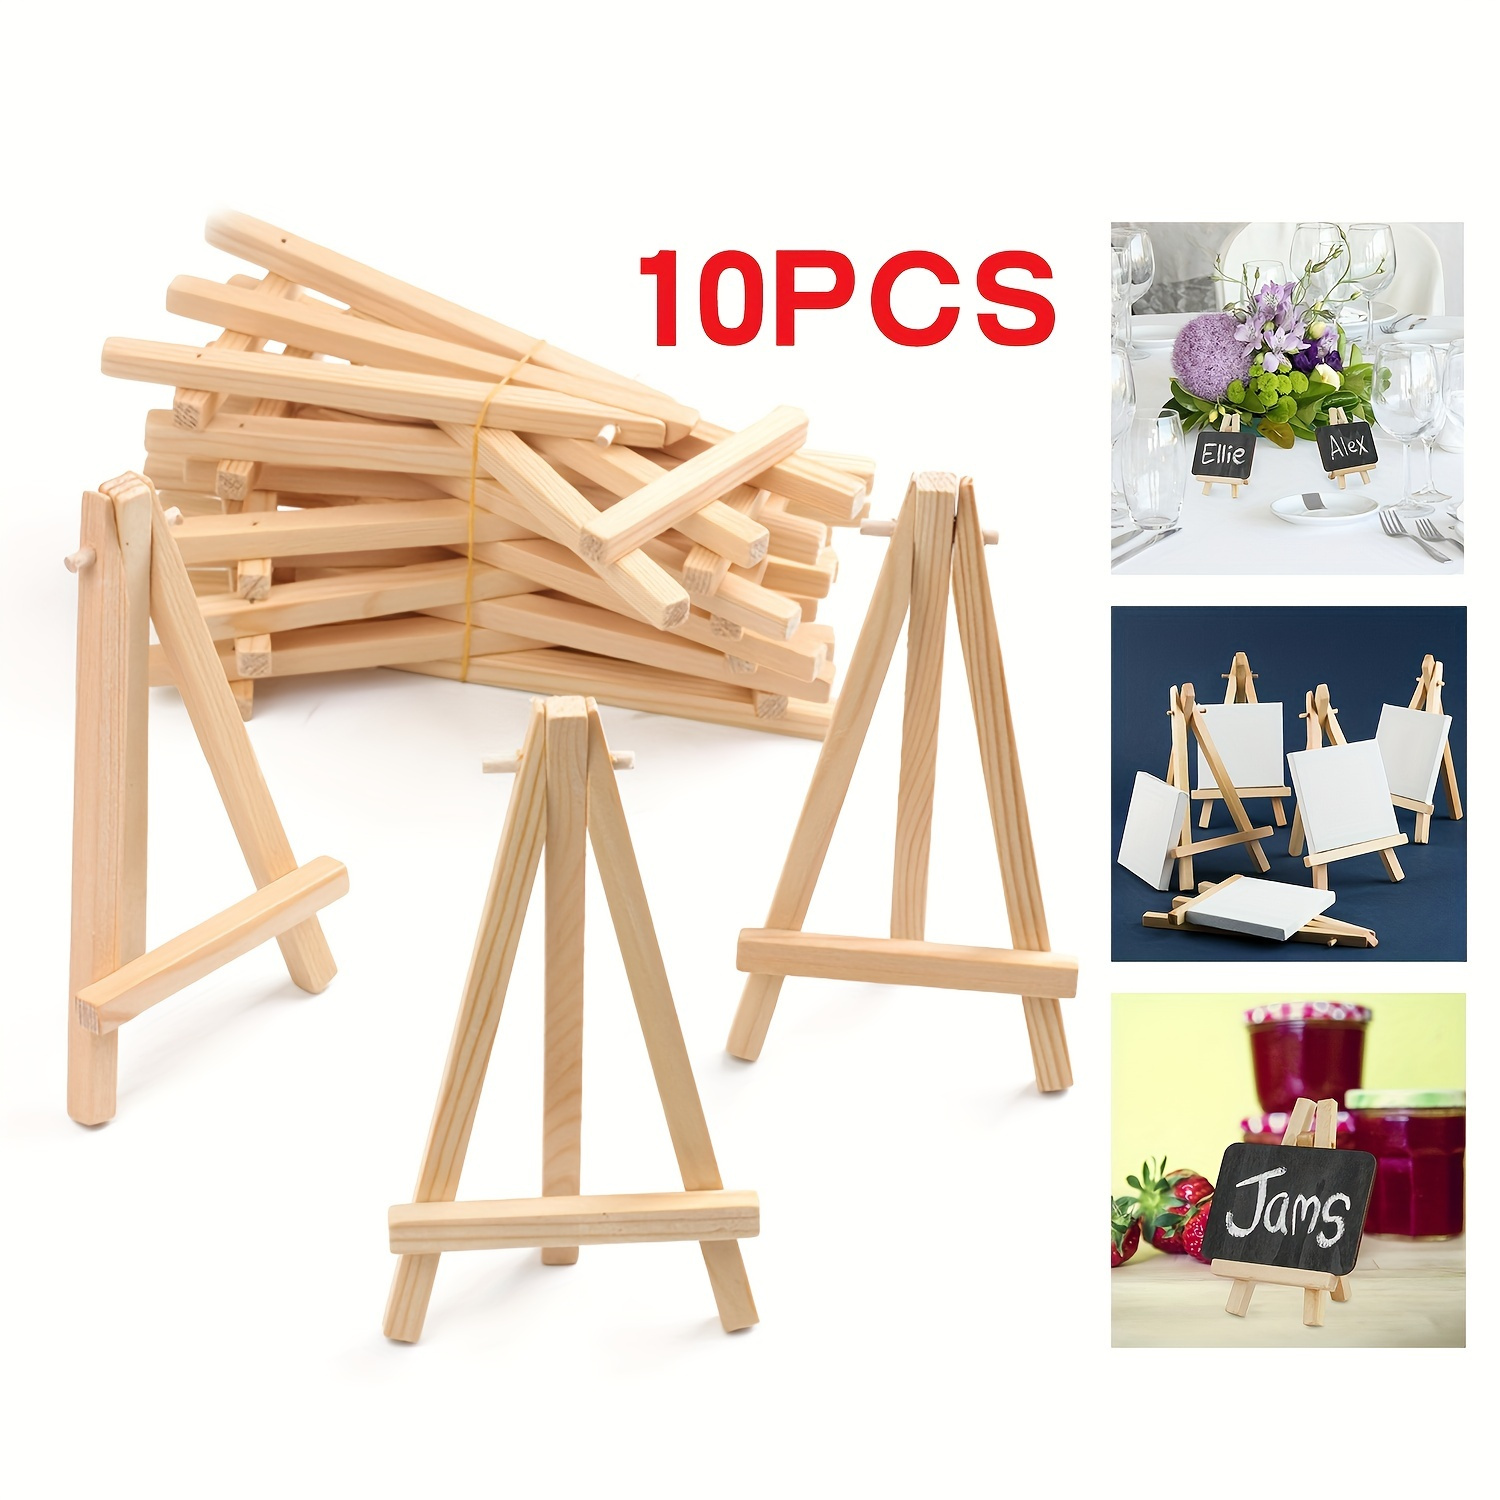 

10pcs Wooden Small Painting Stand Mini Artist Wooden Easel Wood Wedding Table Card Stand Display Holder